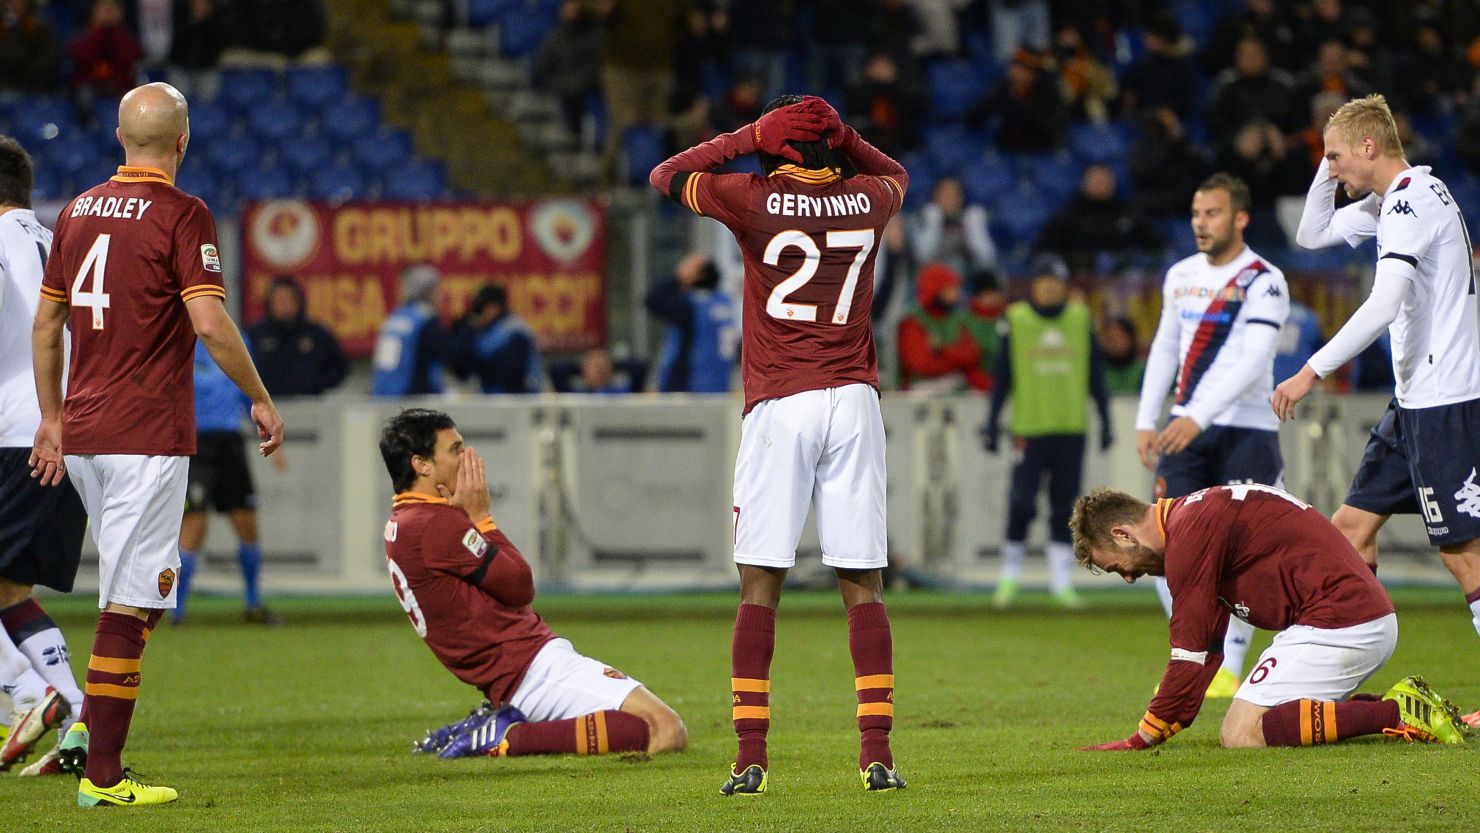 Roma players share the agony of a missed opportunity during the 0-0 draw against Cagliari at the Stadio Olimpico on Monday.